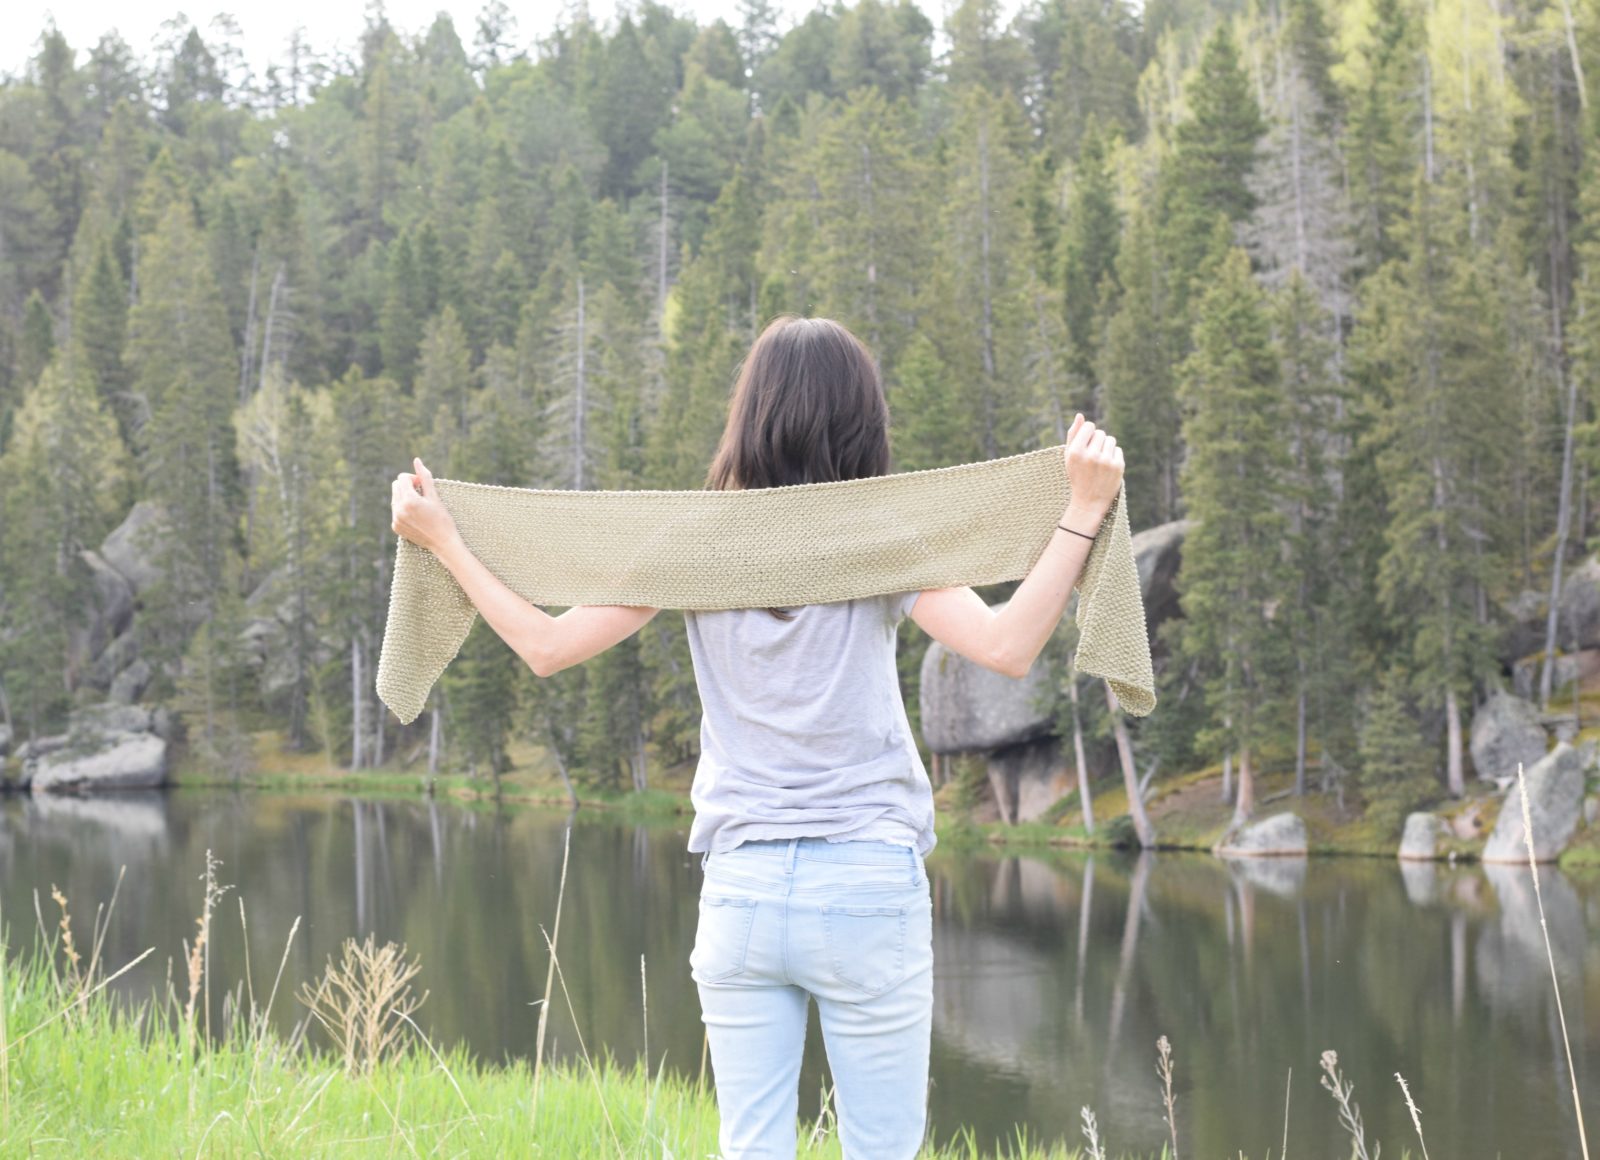 Yosemite Scarf – We Are Knitters Review & Giveaway